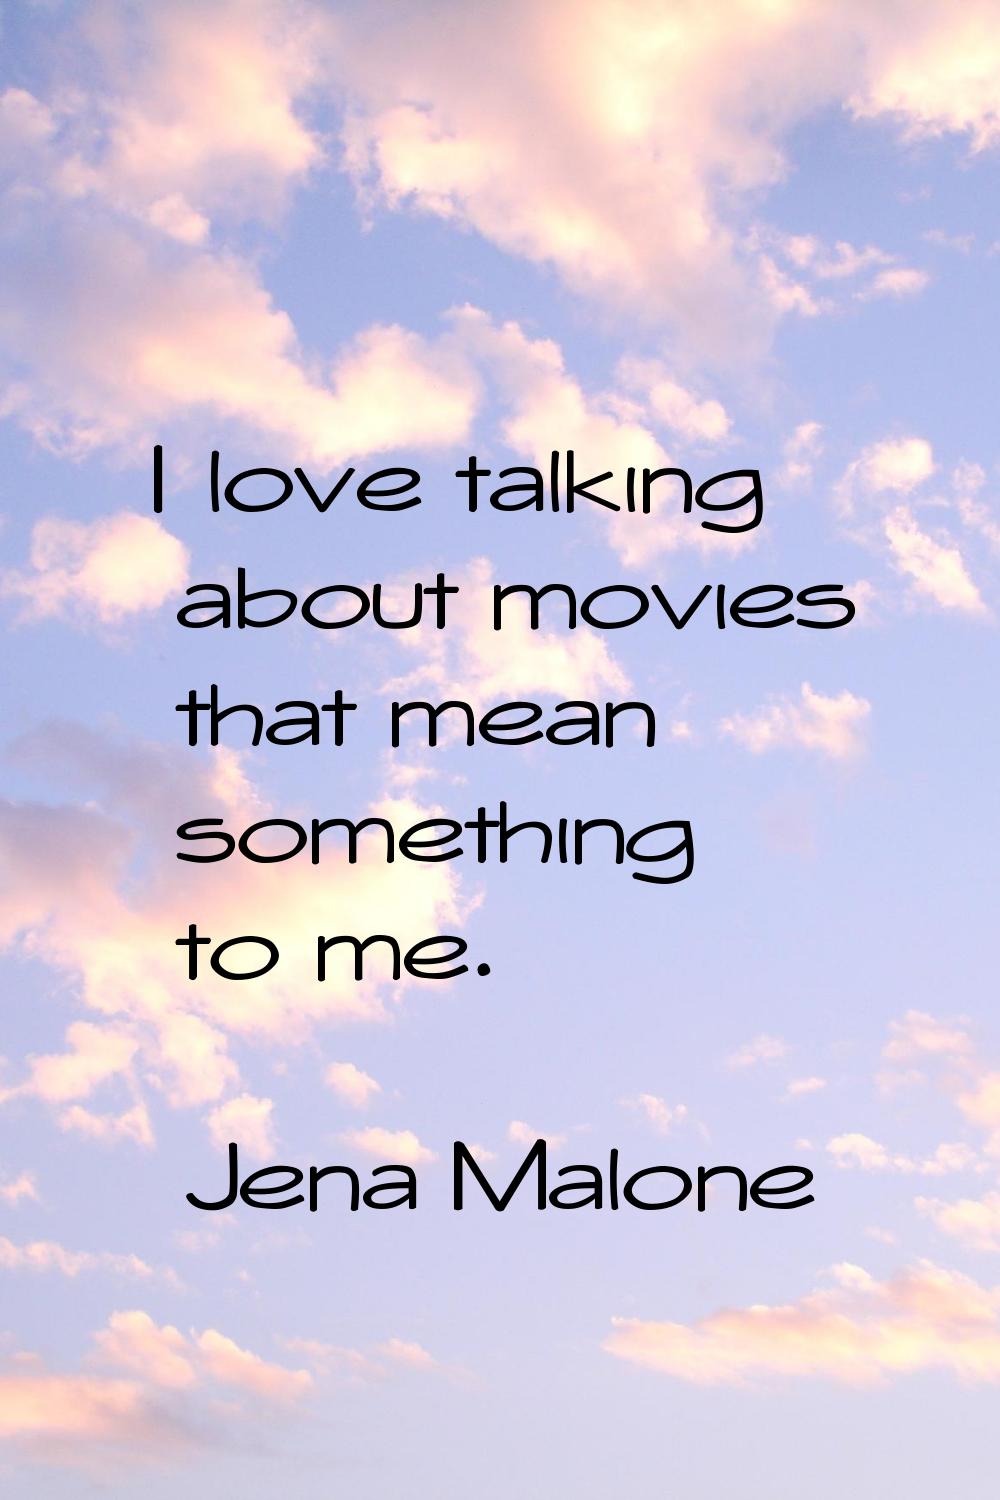 I love talking about movies that mean something to me.